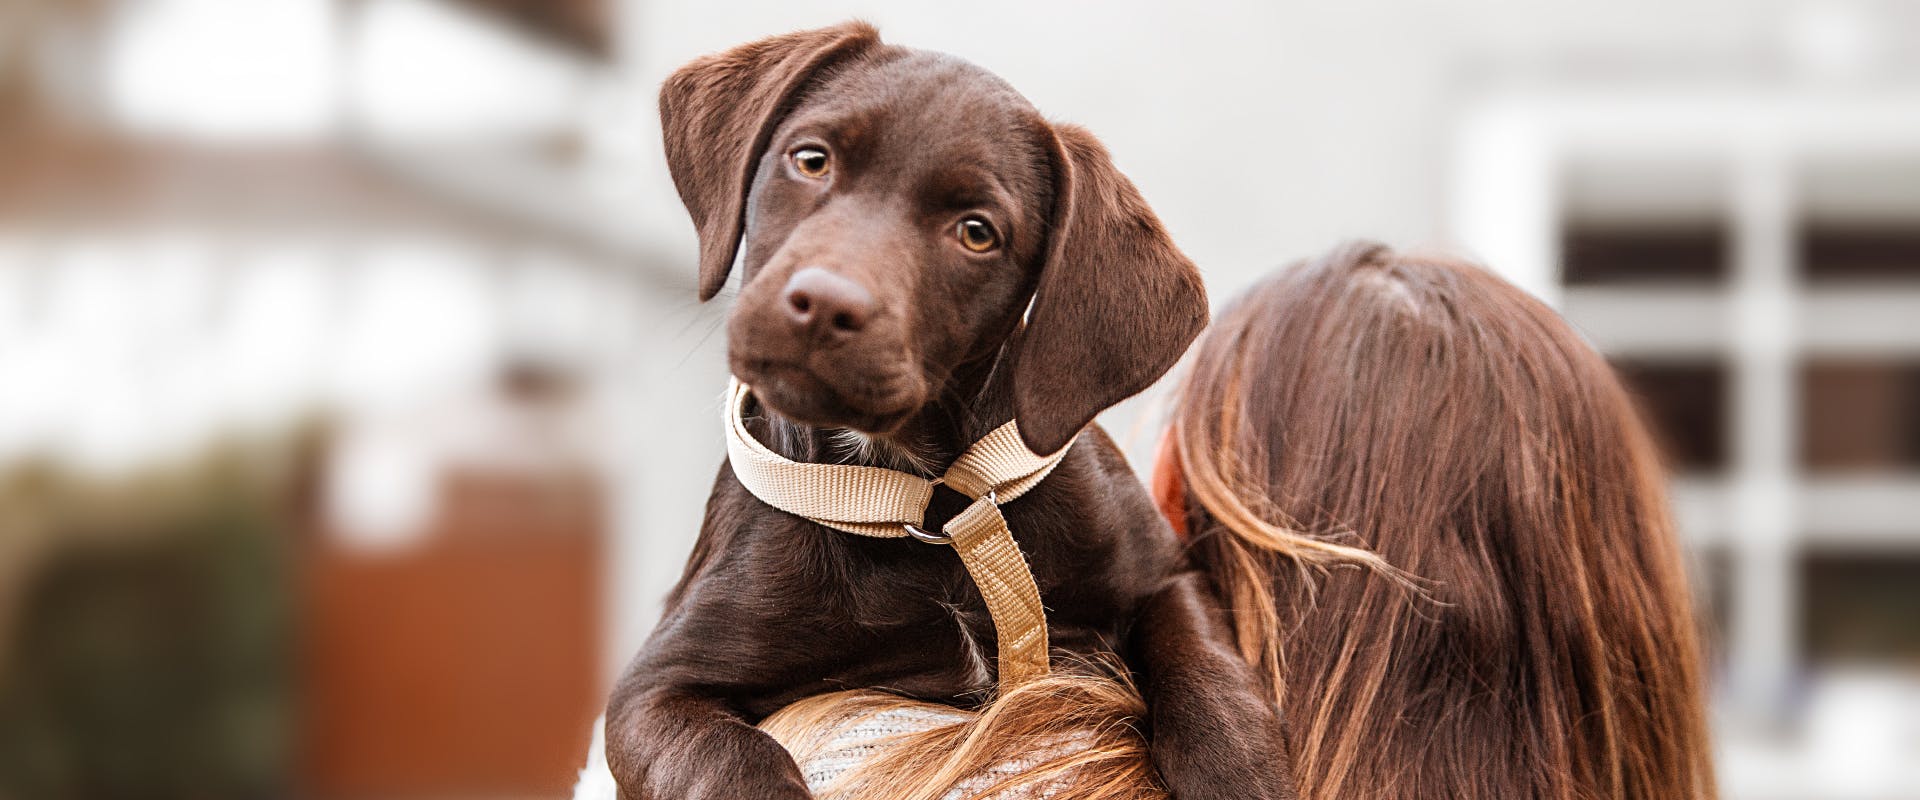 a chocolate labrabor puppy being carried by a woman with long brown hair